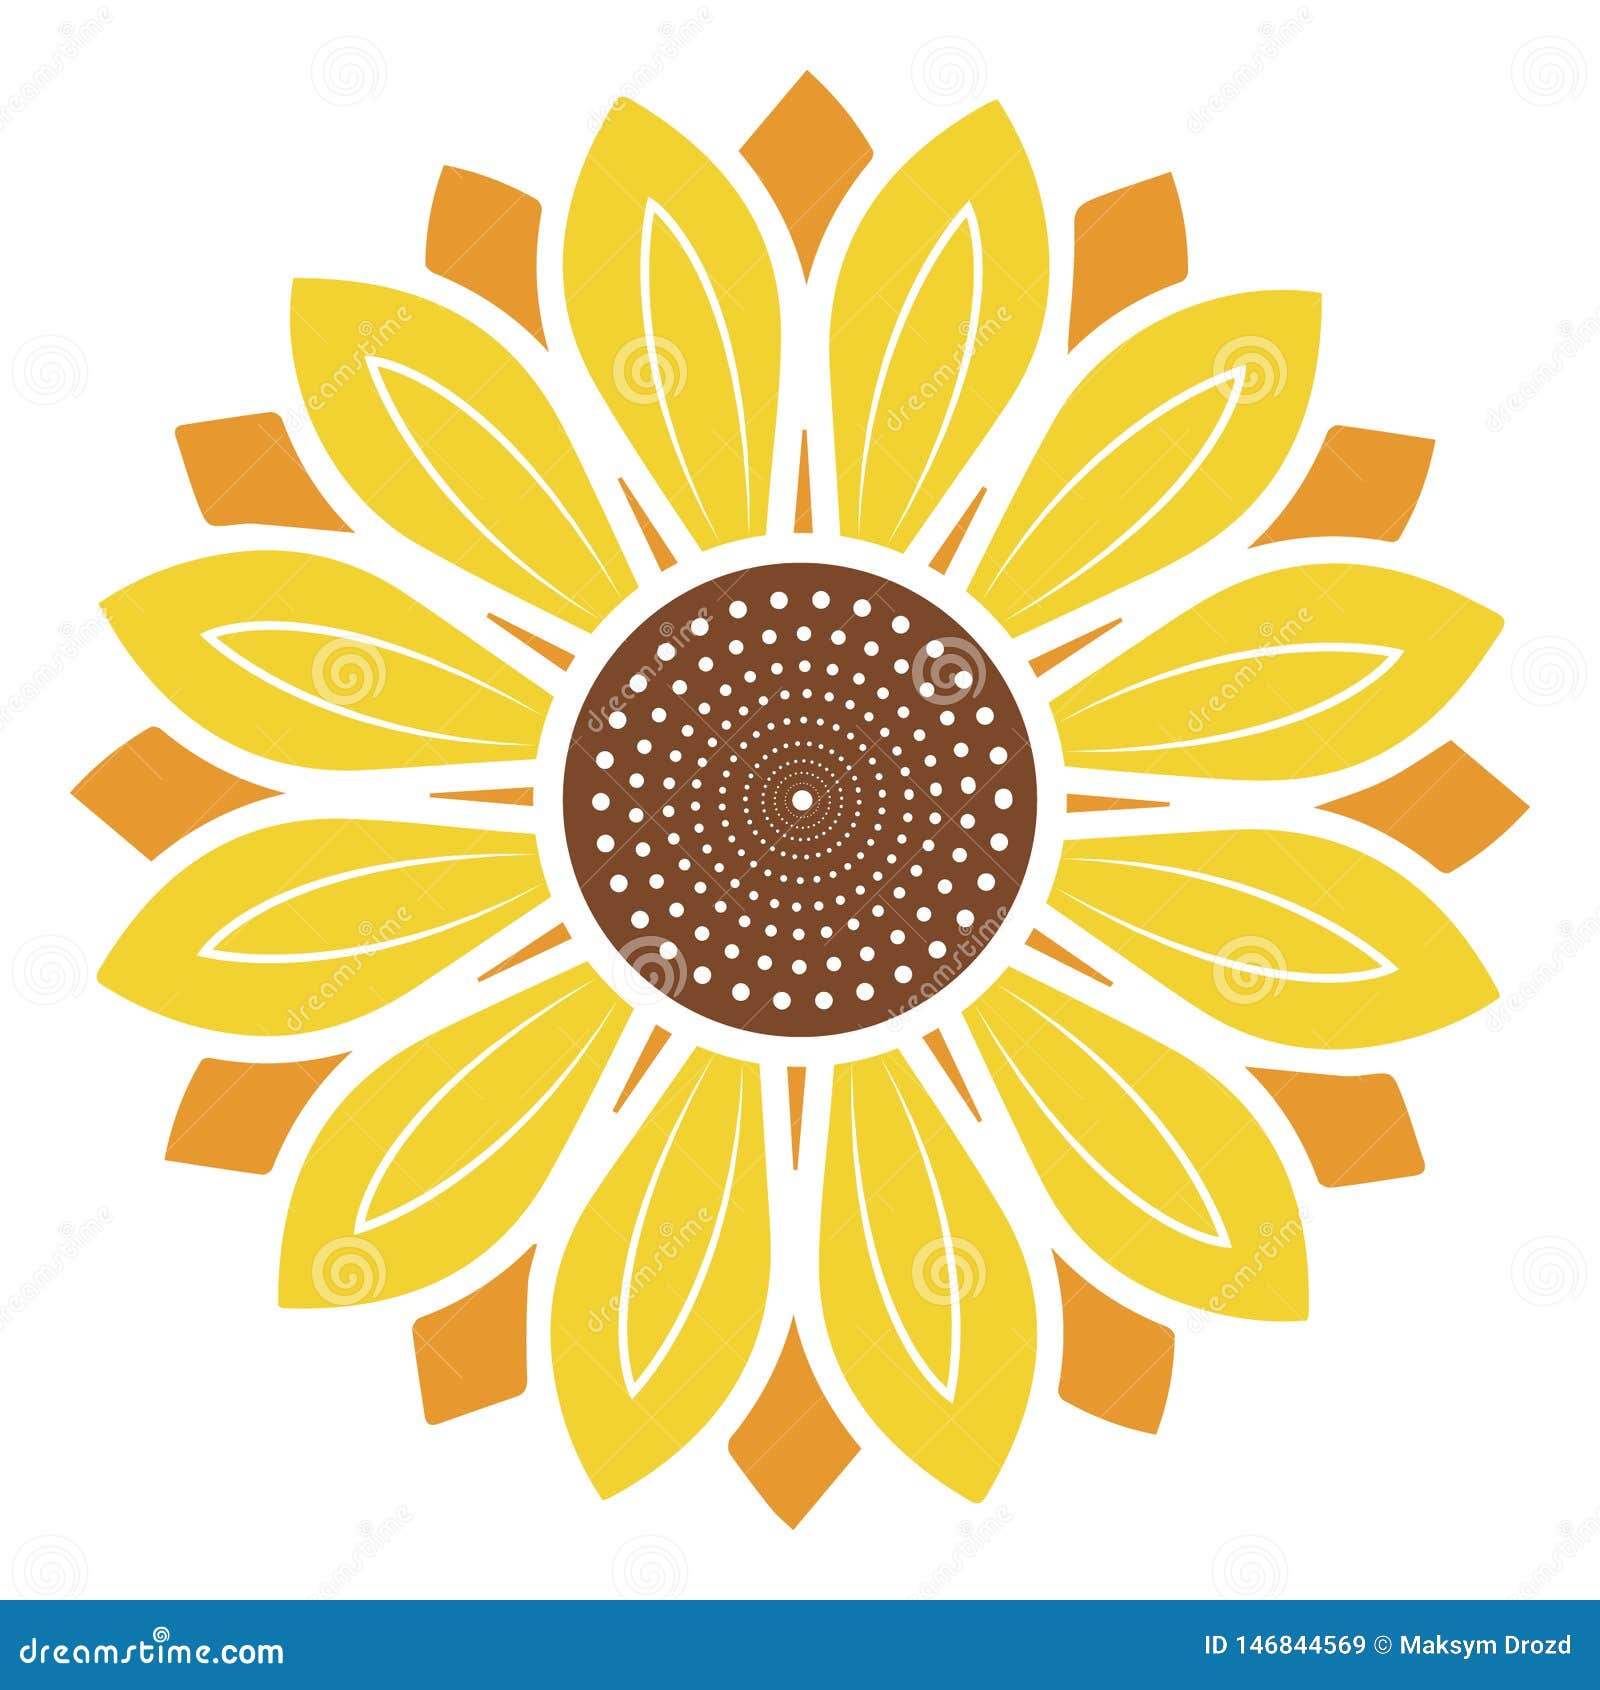 Download Logo And Symbol Of Sunflower Vector Illustration In Flat ...